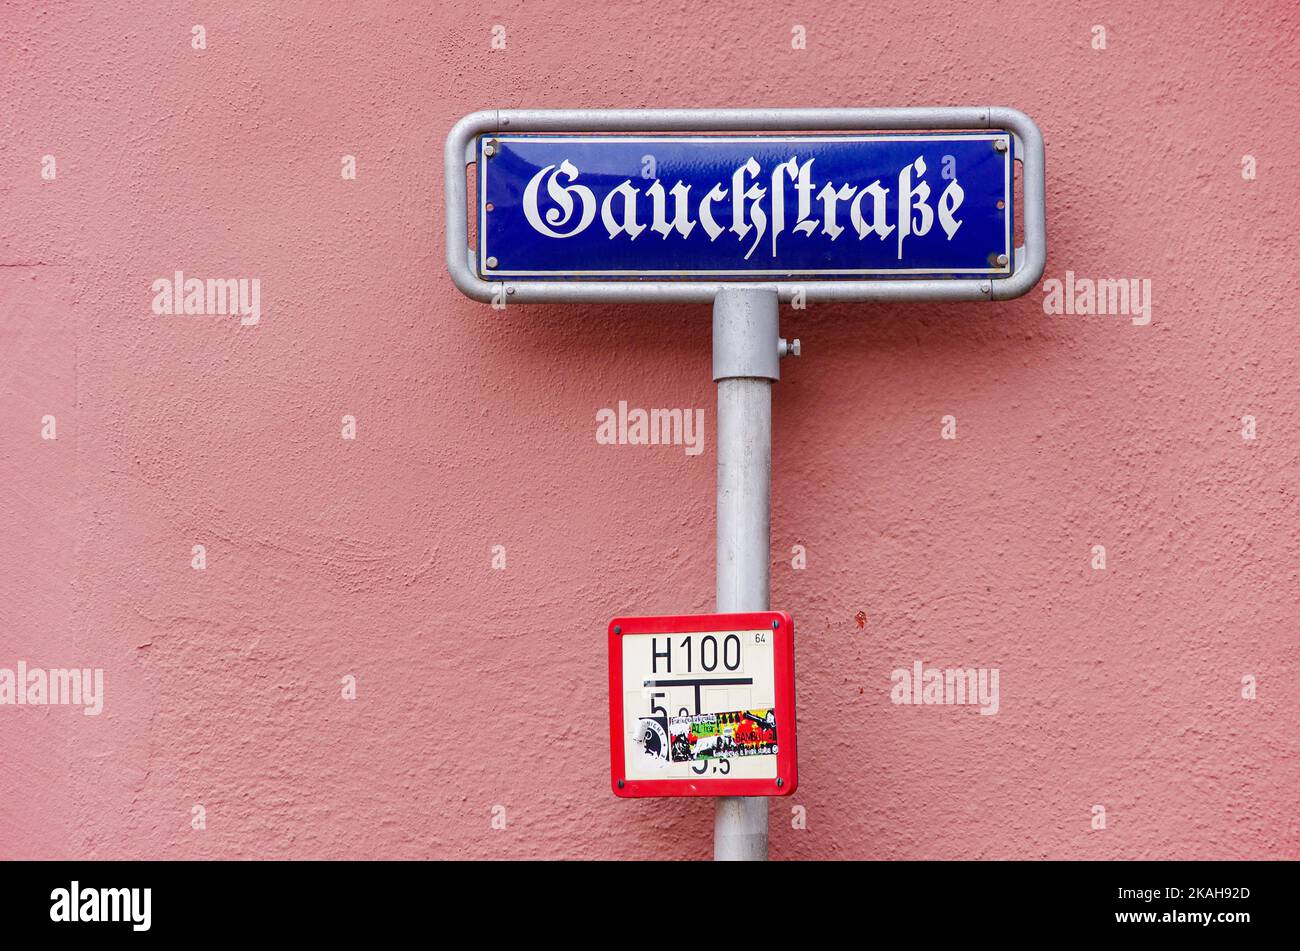 Street sign Gauchstrasse, a street sign which reads like Gauckstrasse as if it was named after the 11th Federal President of Germany. Stock Photo